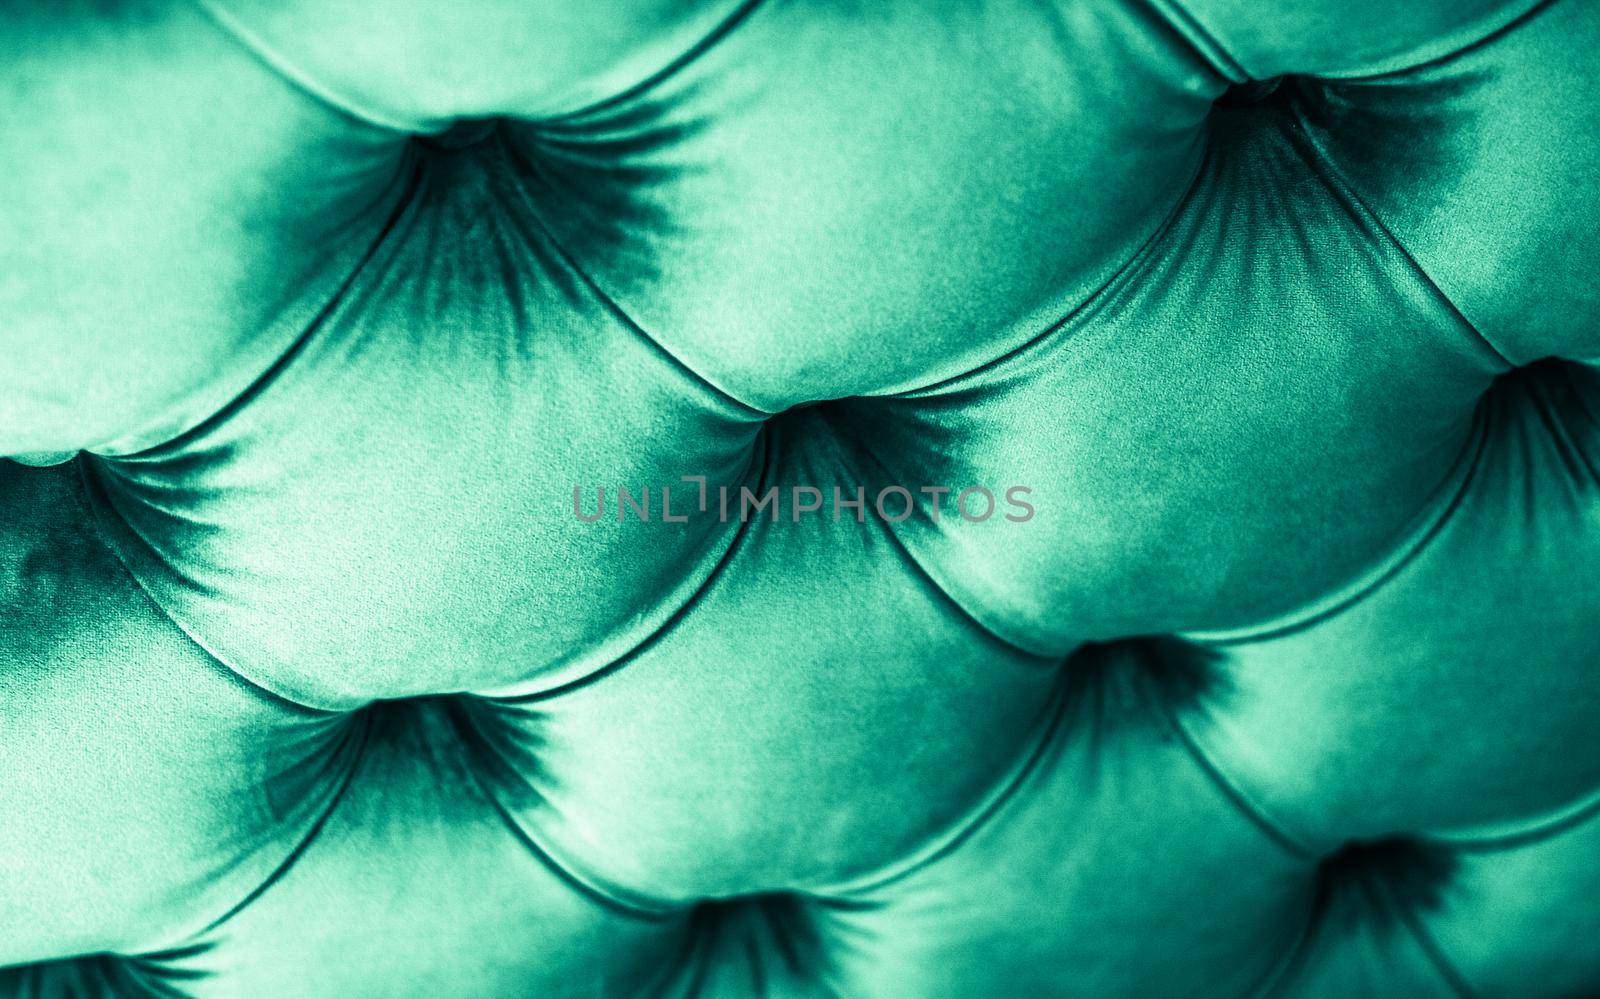 Furniture design, classic interior and royal vintage material concept - Emerald luxury velour quilted sofa upholstery with buttons, elegant green home decor texture and background